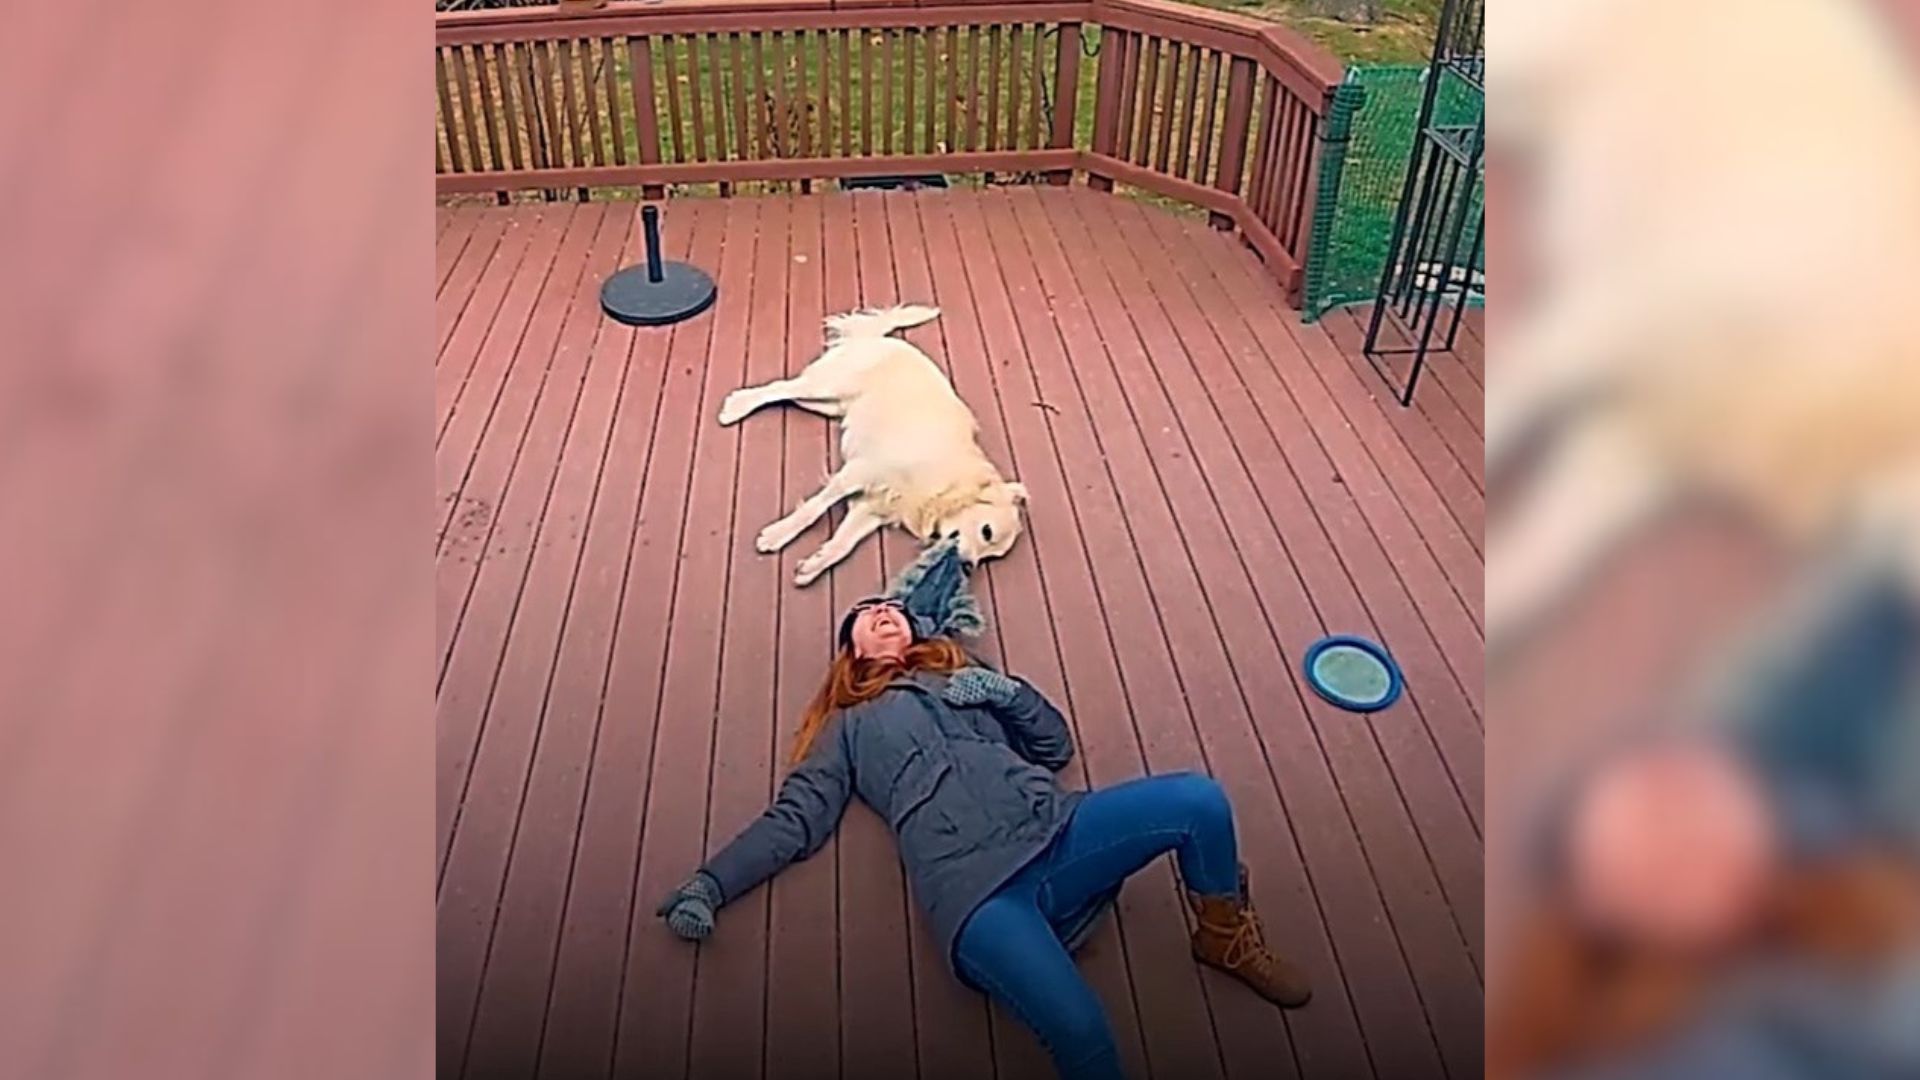 Camera Catches A Woman And Her Dog Having A Moment Of Pure Joy  